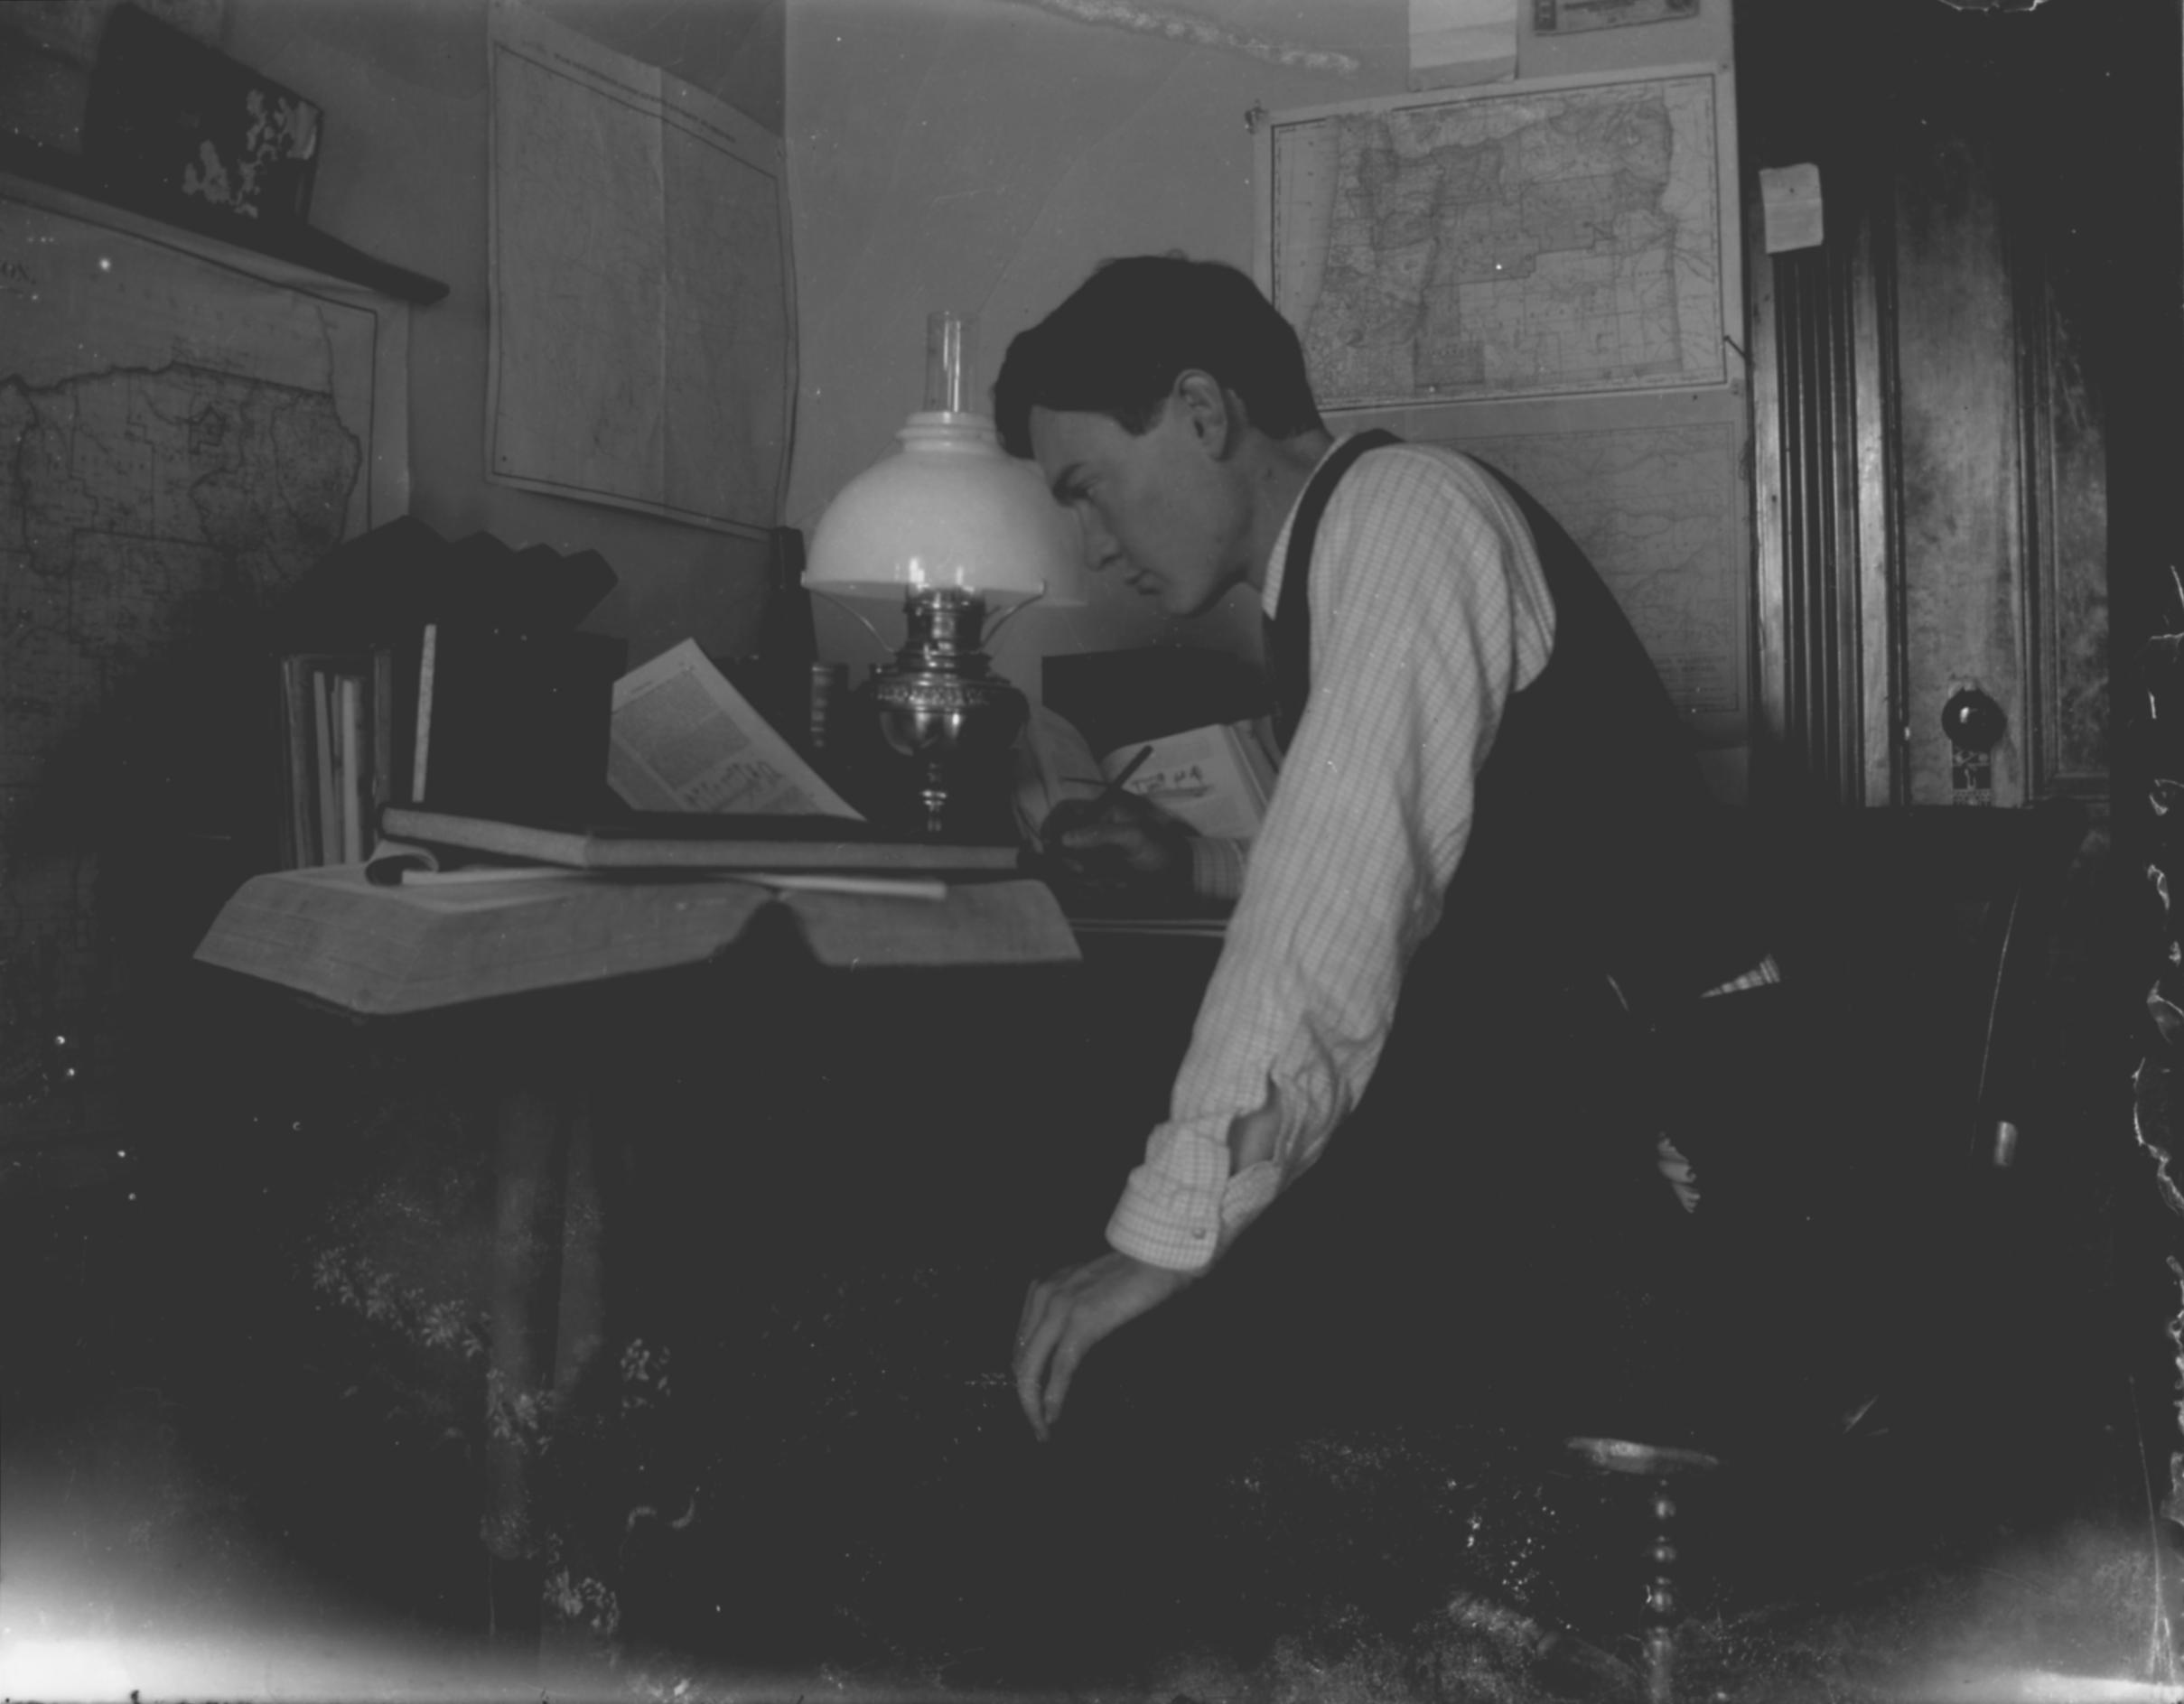 Young man sitting at desk